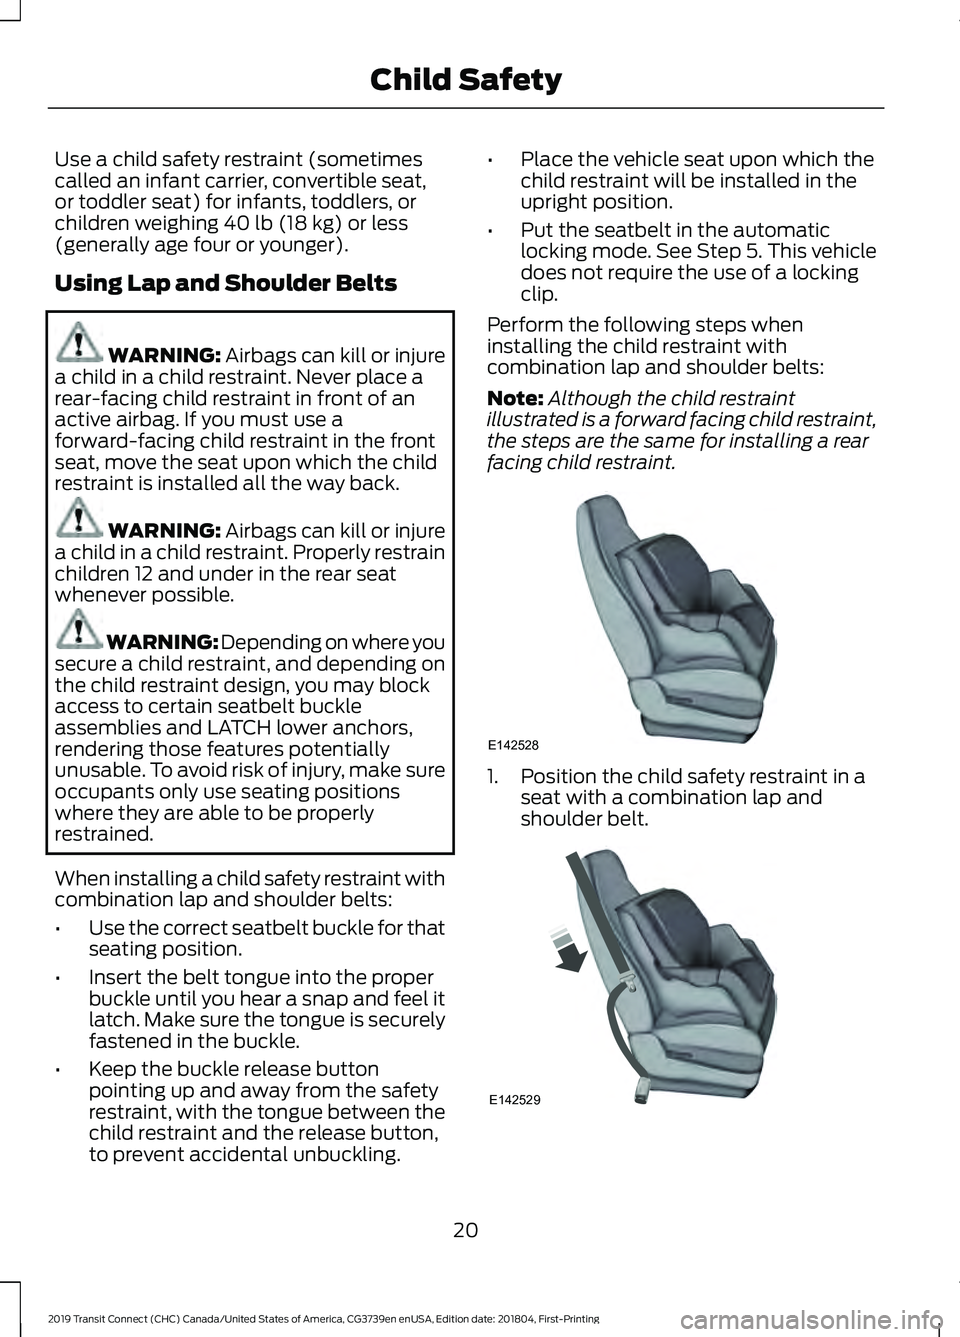 FORD TRANSIT CONNECT 2019  Owners Manual Use a child safety restraint (sometimes
called an infant carrier, convertible seat,
or toddler seat) for infants, toddlers, or
children weighing 40 lb (18 kg) or less
(generally age four or younger).
